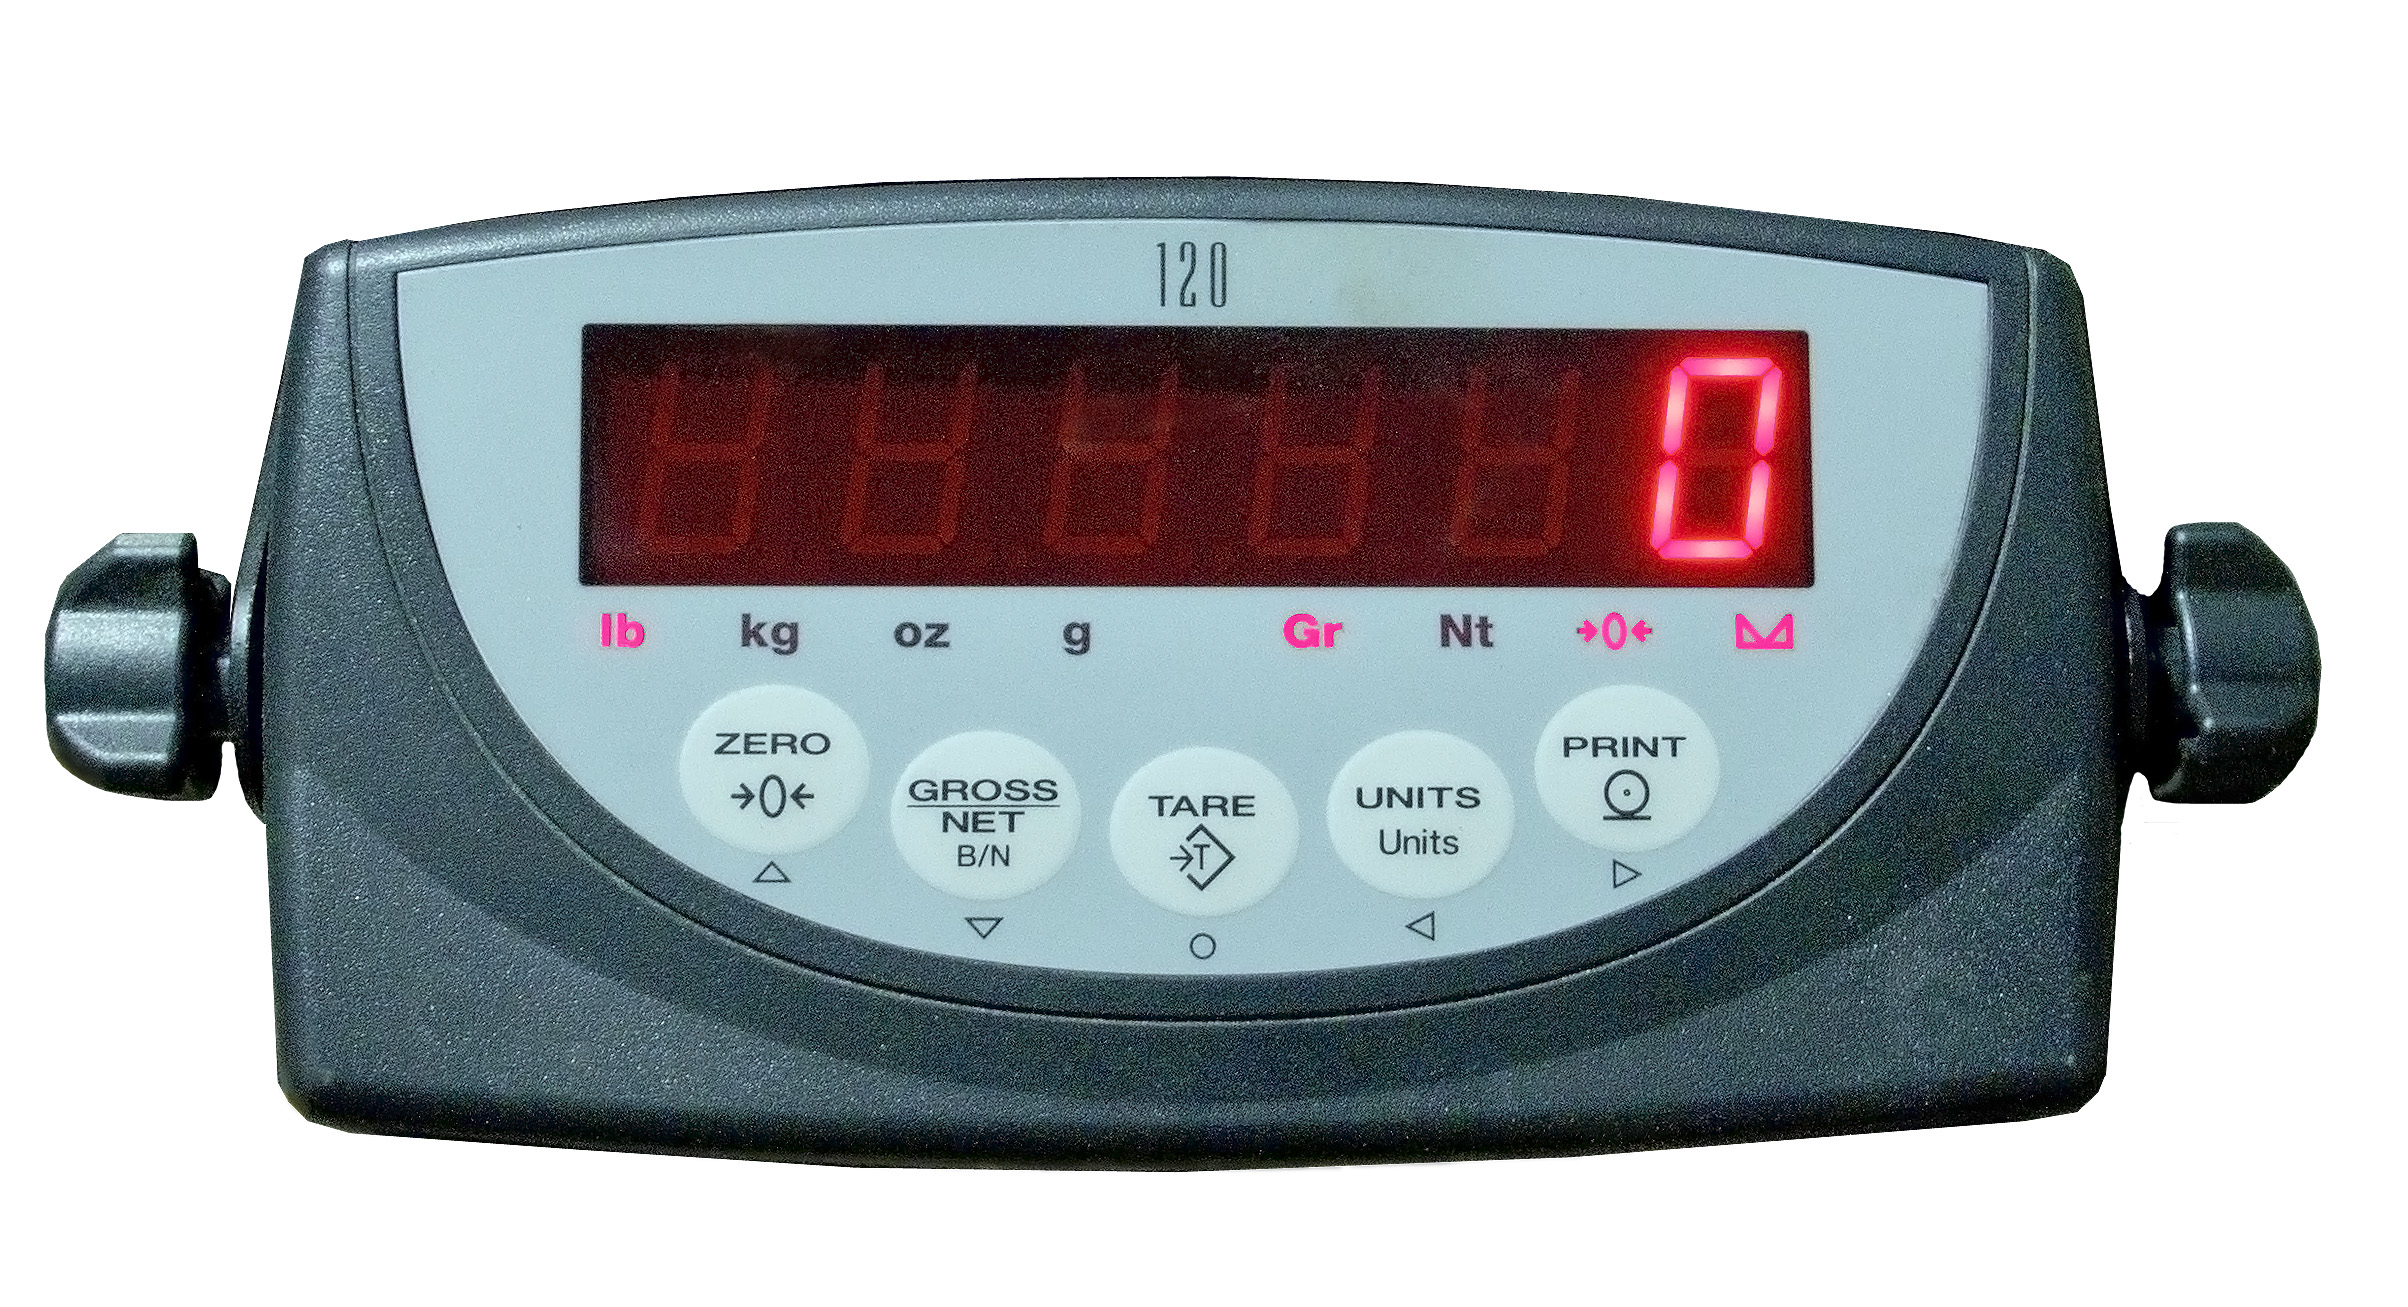 Available weigh scales built into the machine